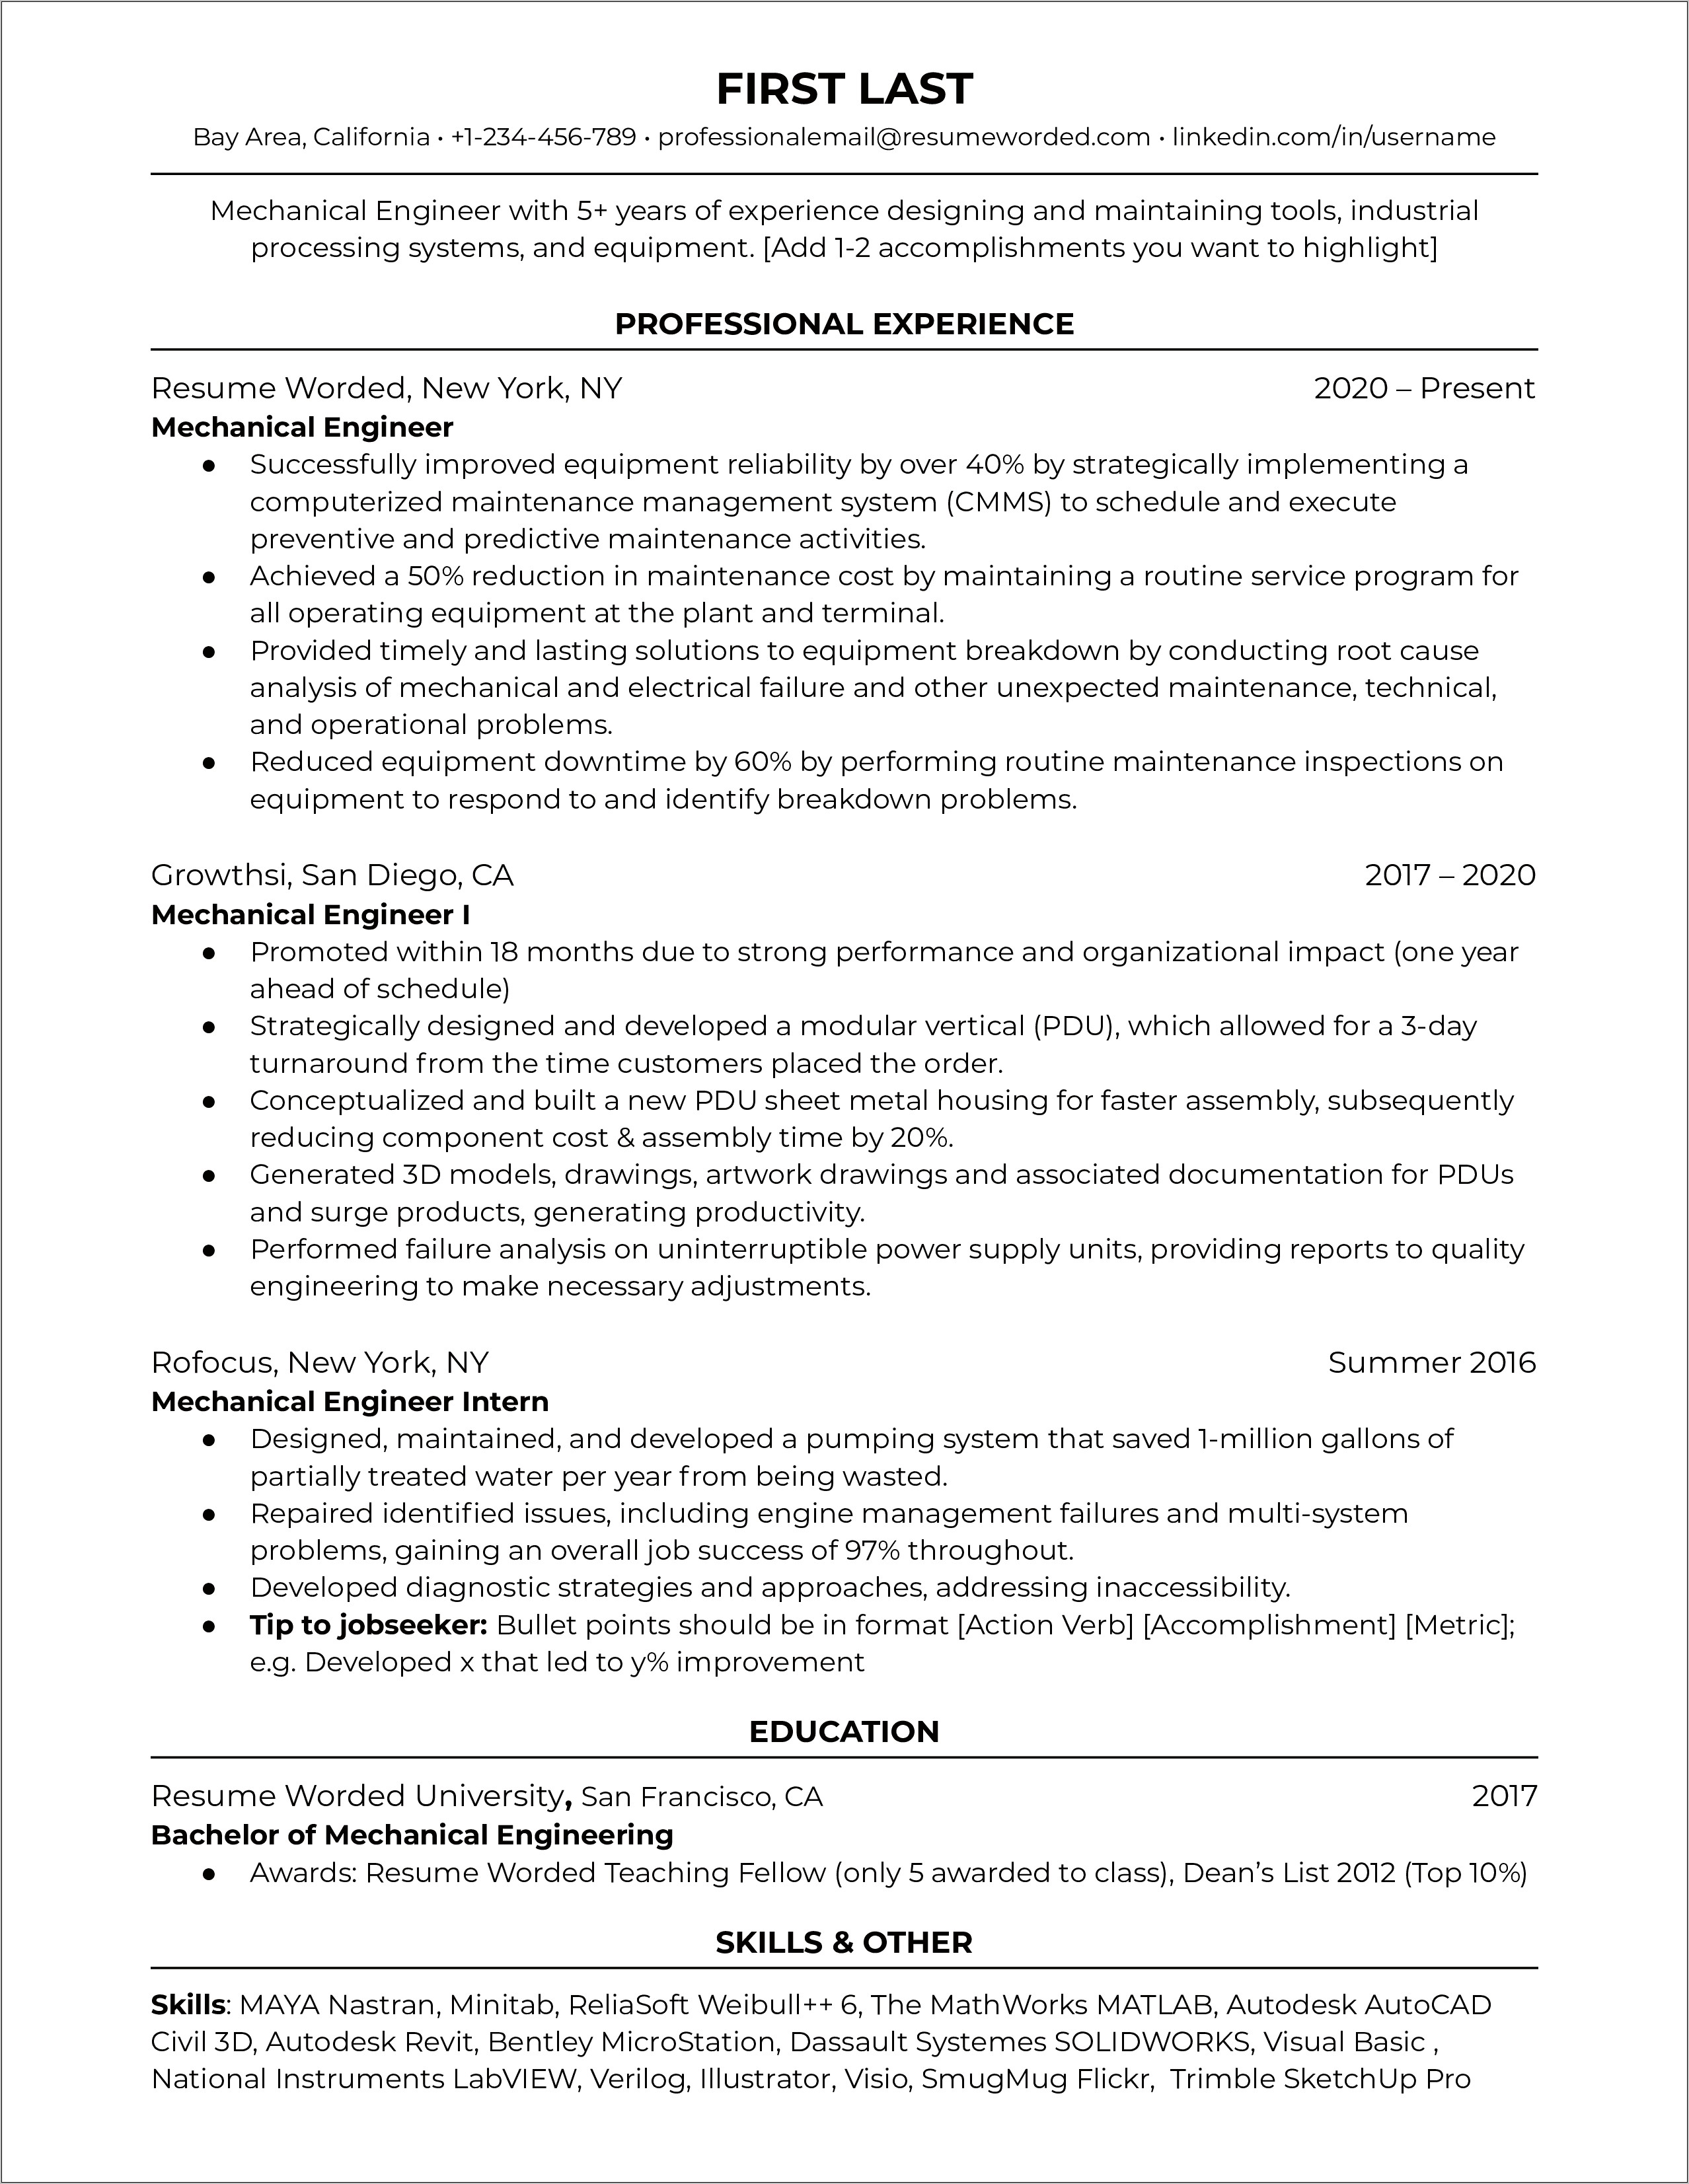 1 Year Experience Resume For Mechanical Engineer